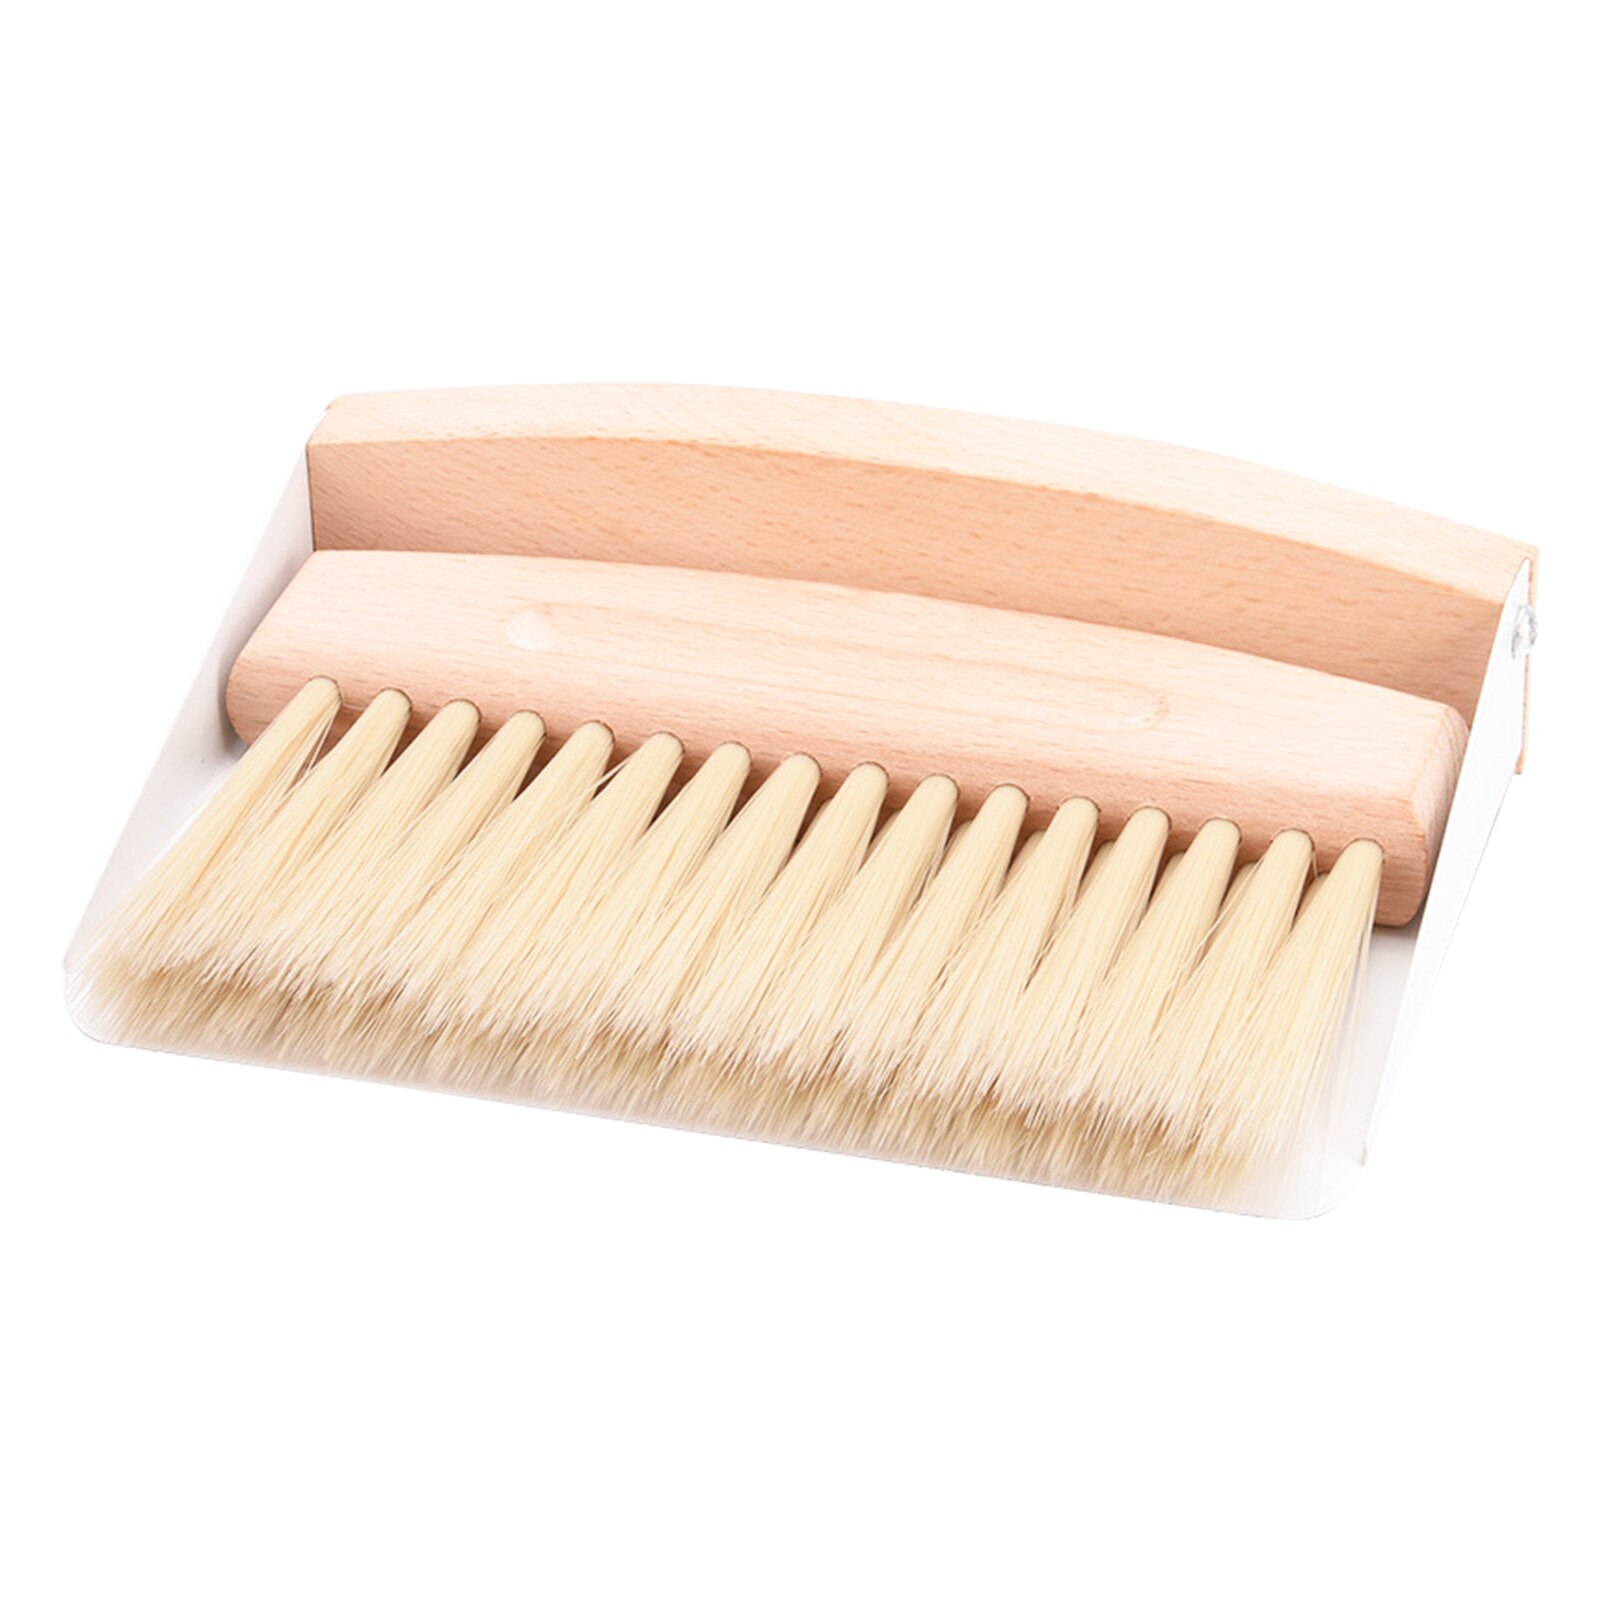 For Crumbs Hand Sweeper Durable Cleaning Tool Practical Broom Natural Wood Mini Save Space Office Shovel Desktop Dustpan Set